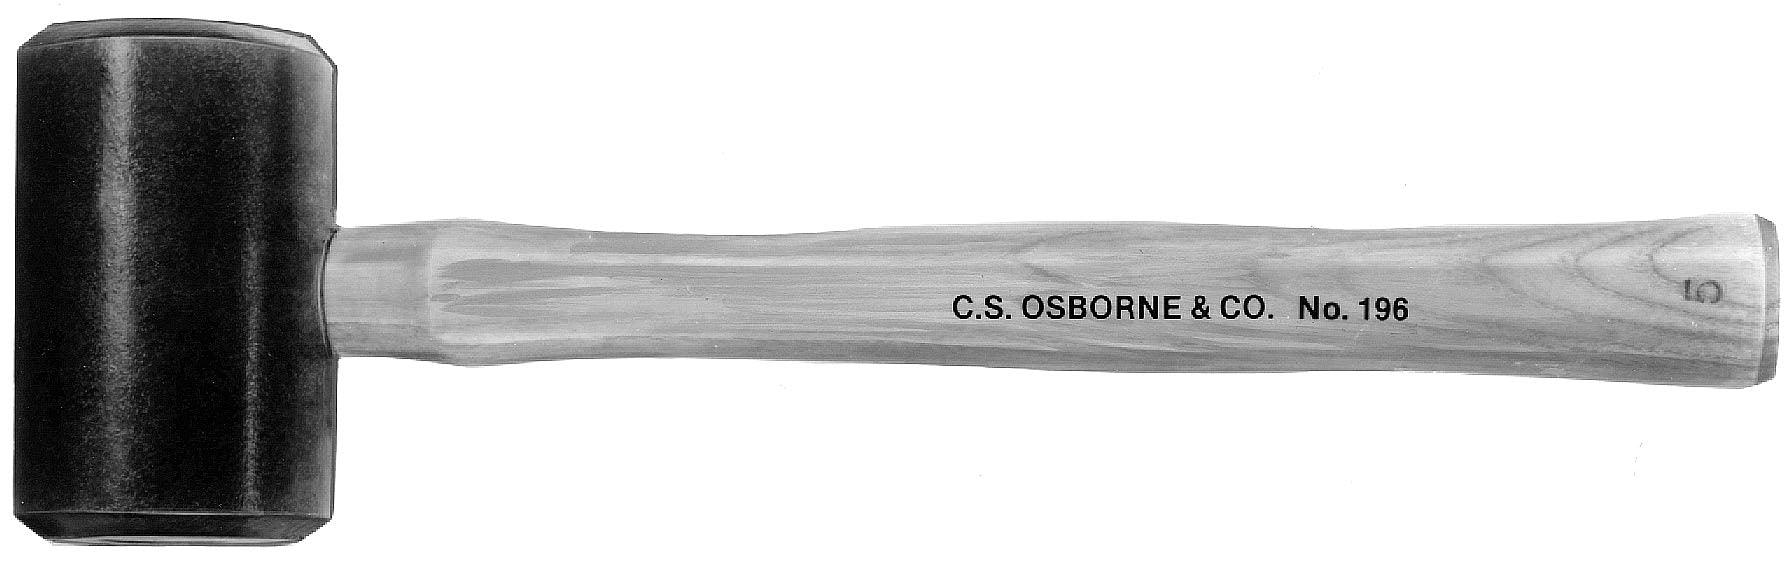 C.S. Osborne Rawhide Mallet - Solid Head - Size 4 - C.S. Osborne Hammers and Mallets